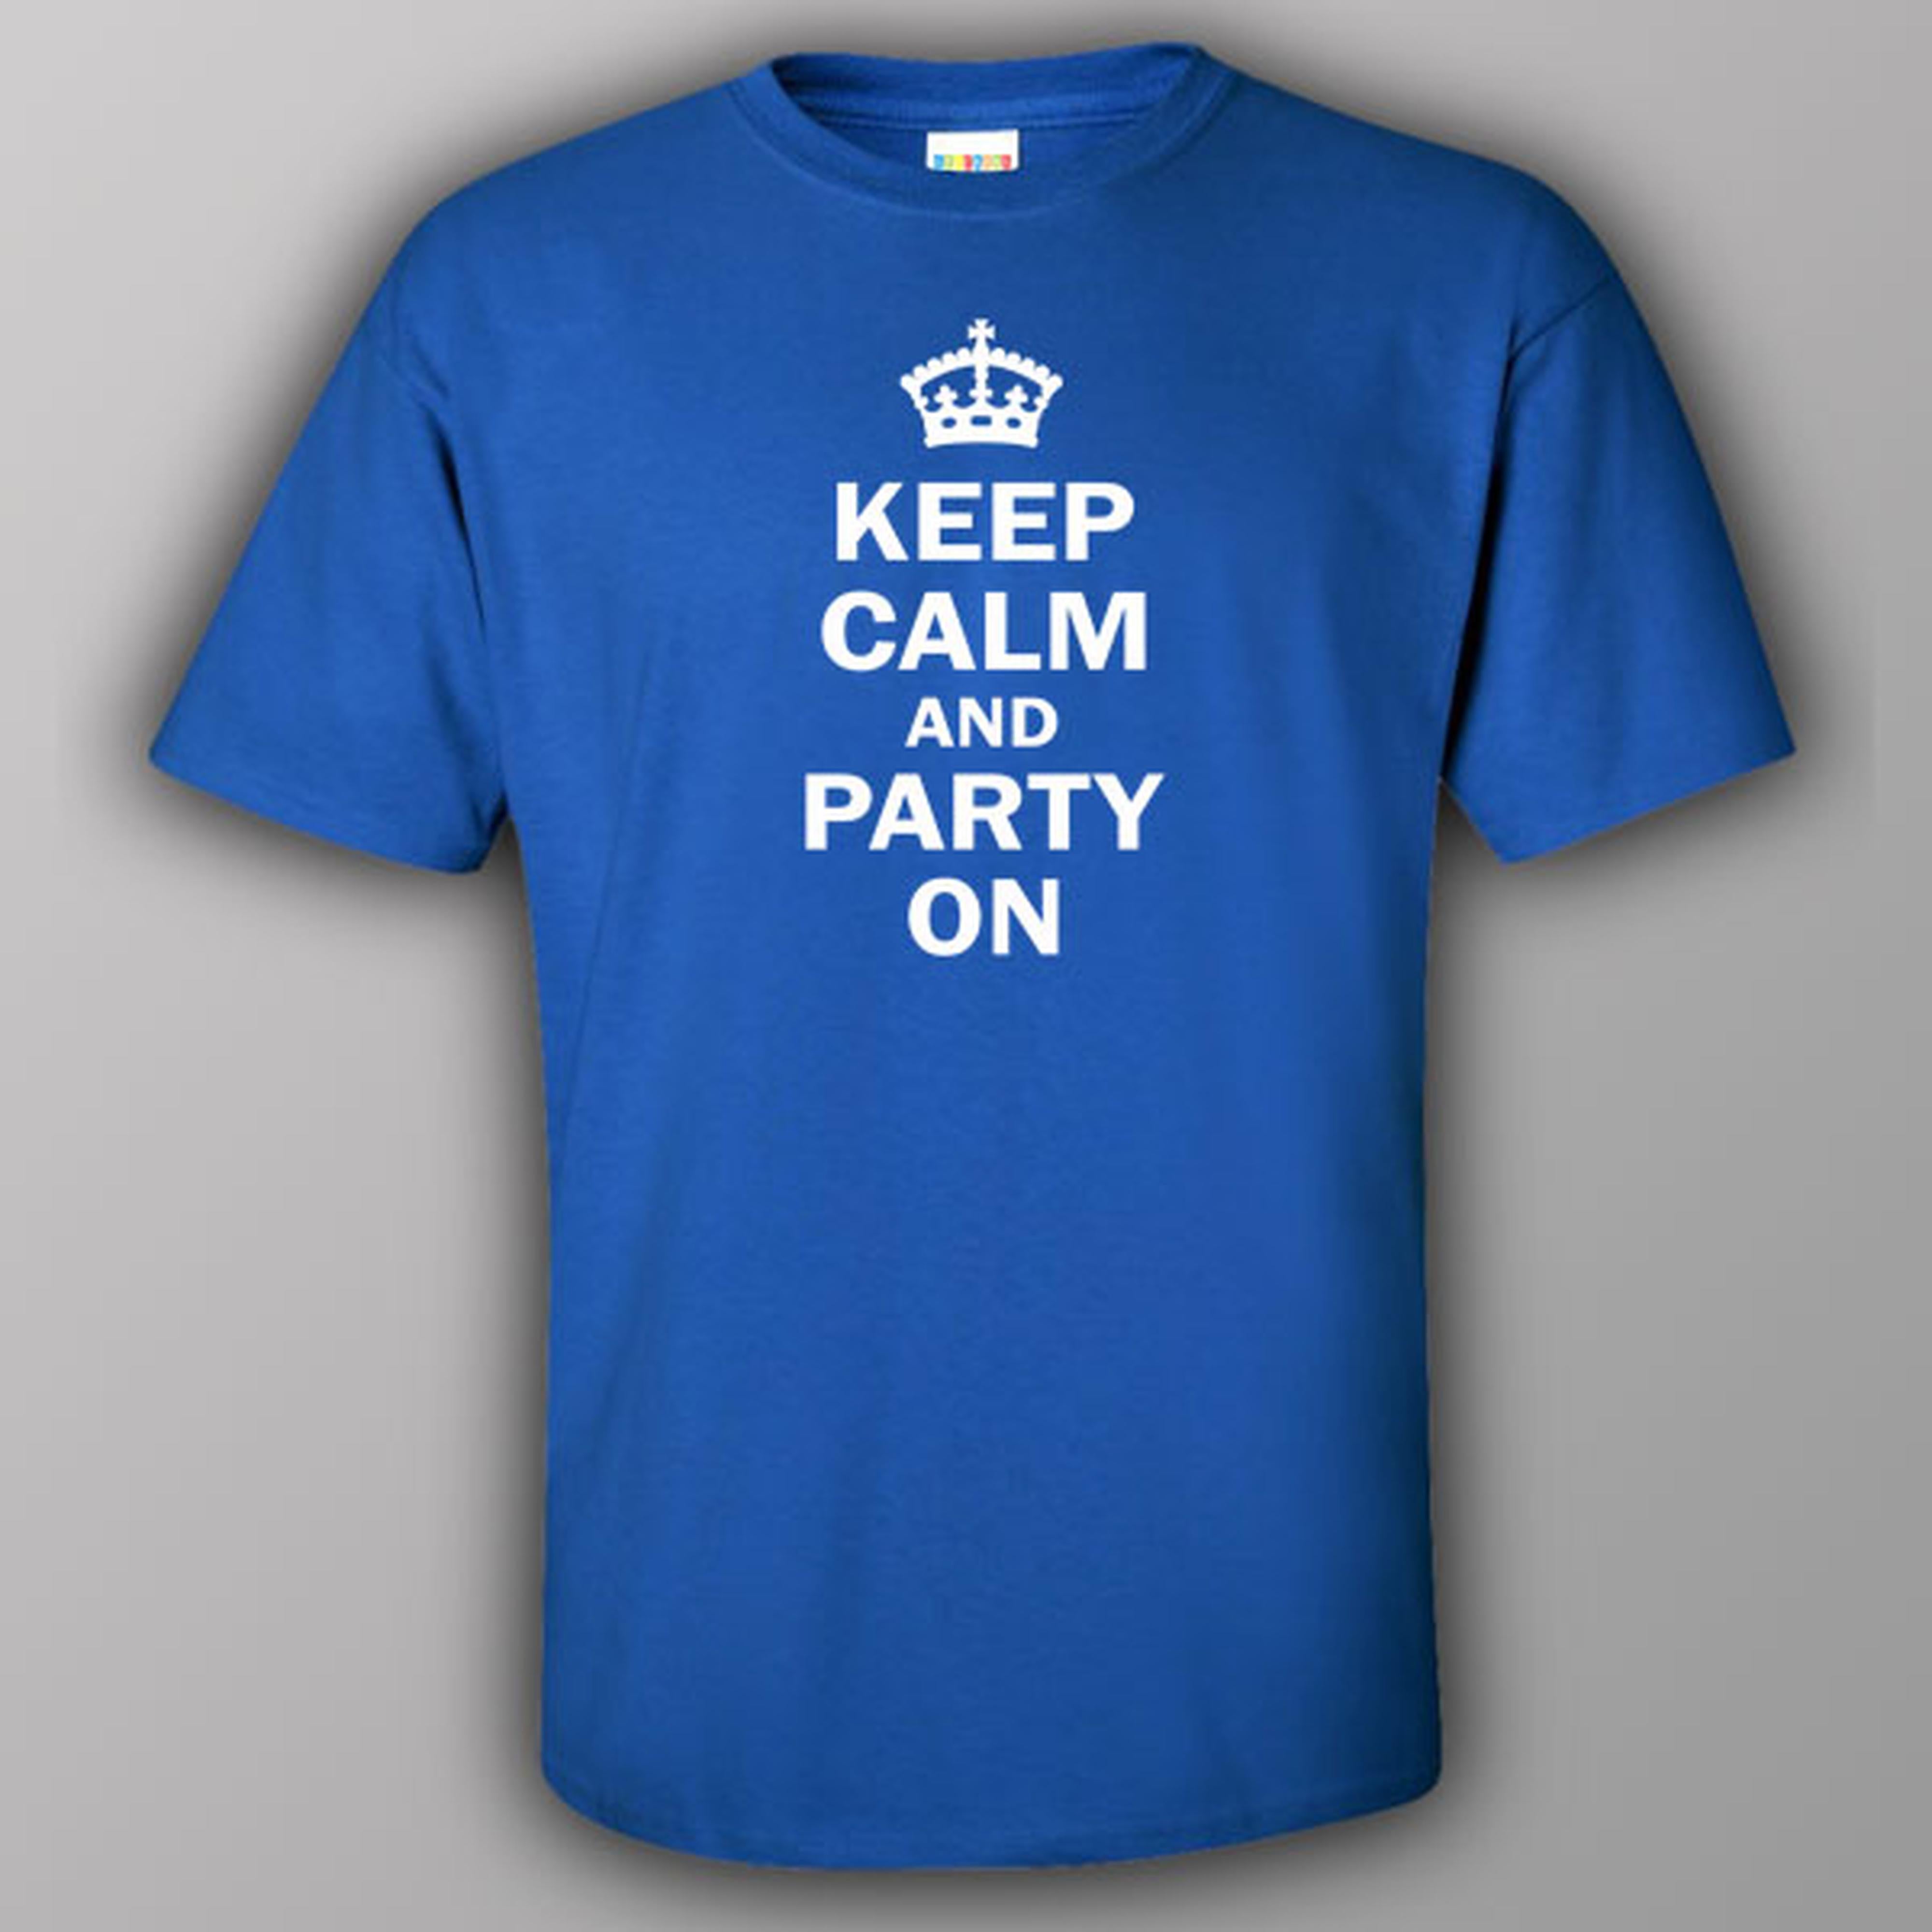 Keep calm and party on - T-shirt